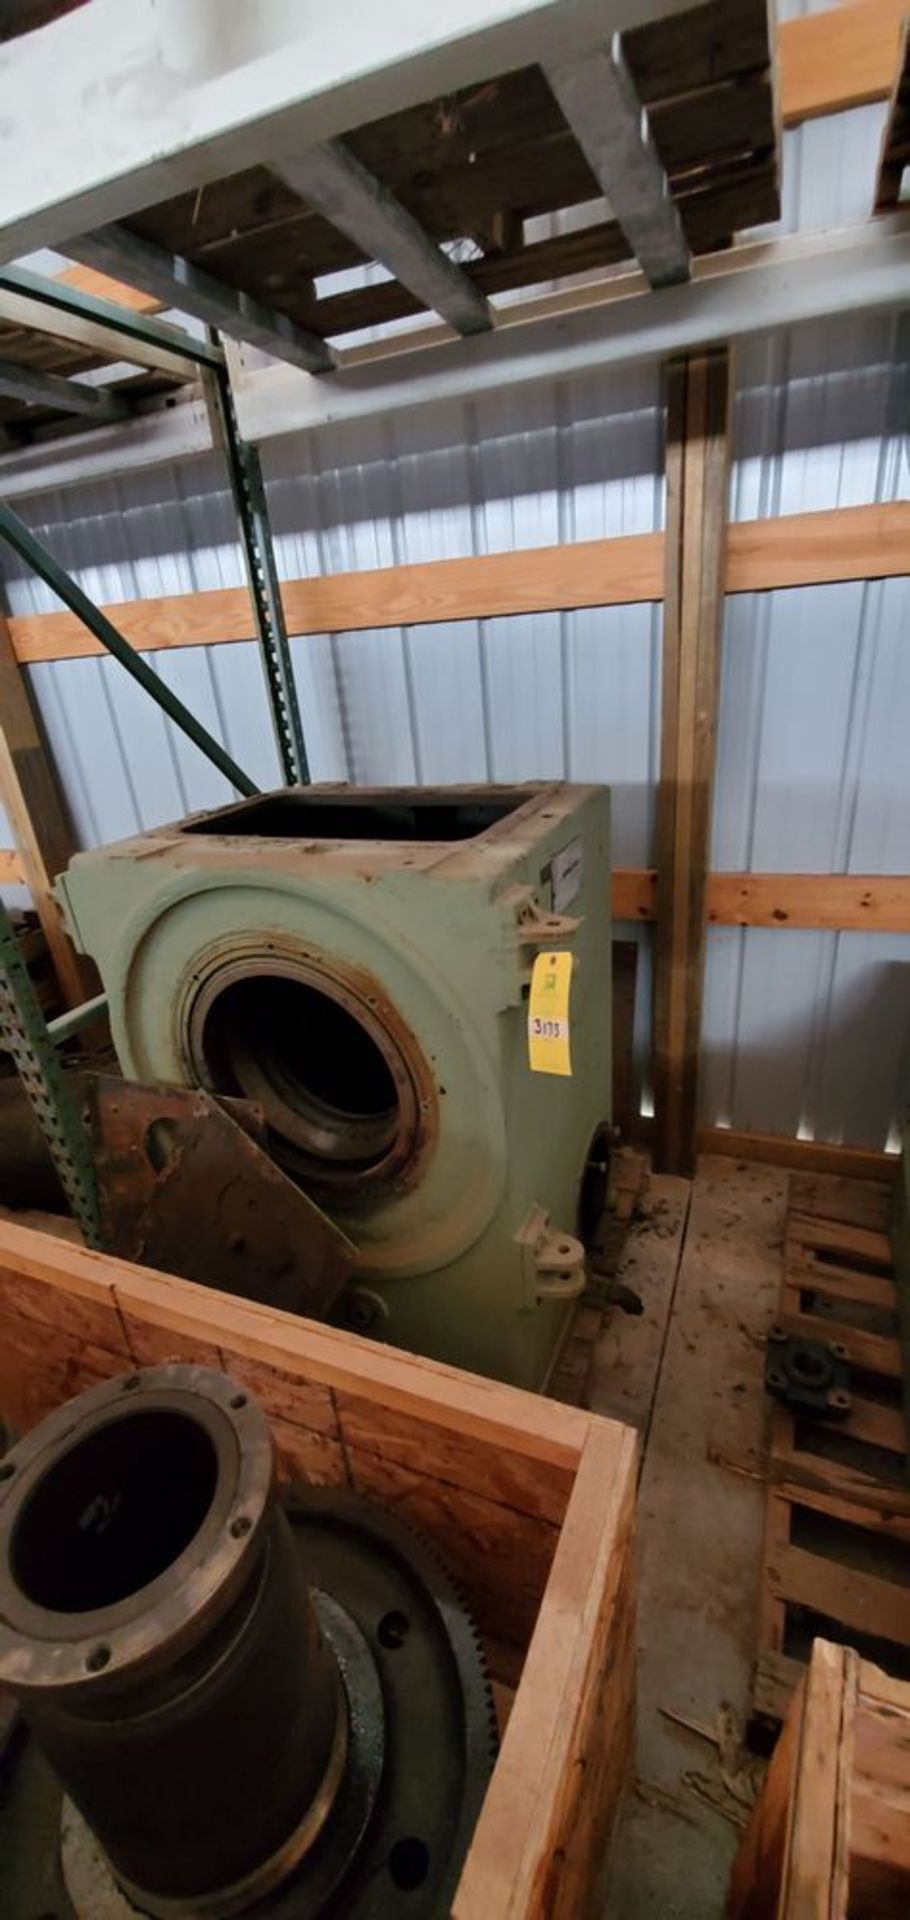 Located in Canon City, CO -- CPM DS casting gearbox loading fee $50 ***Note from Auctioneer: Loading